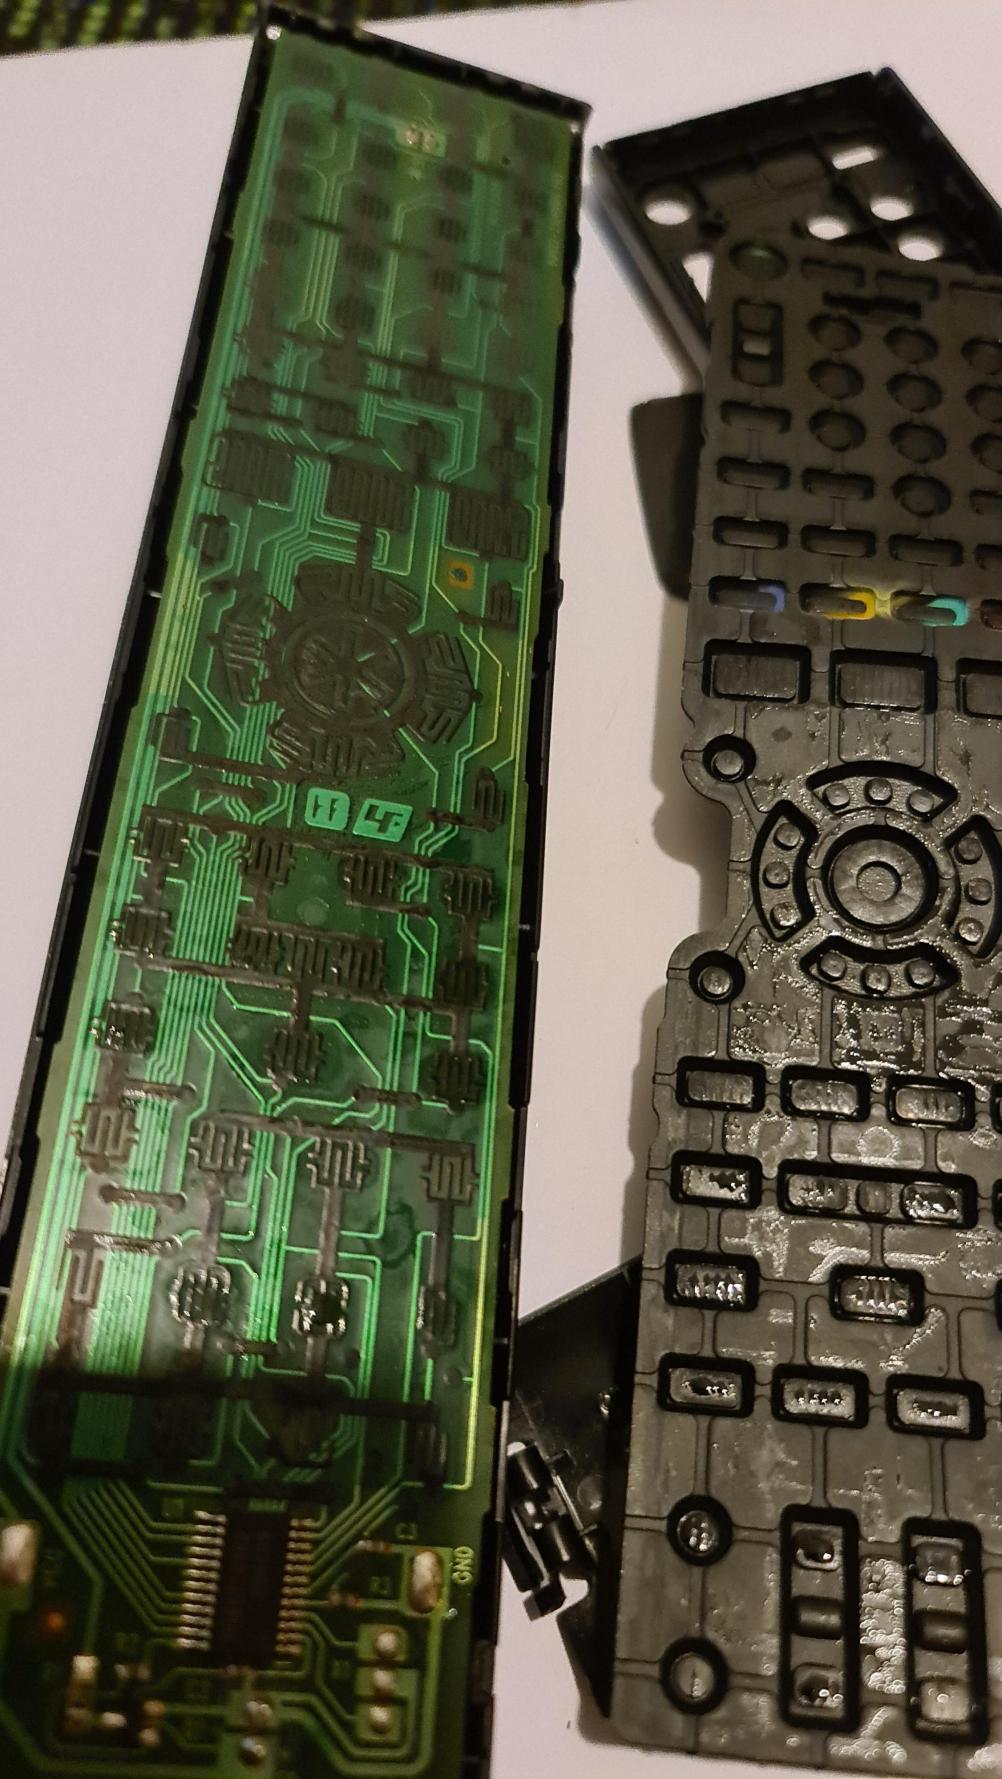 SONY  Remote Control - Inside Image